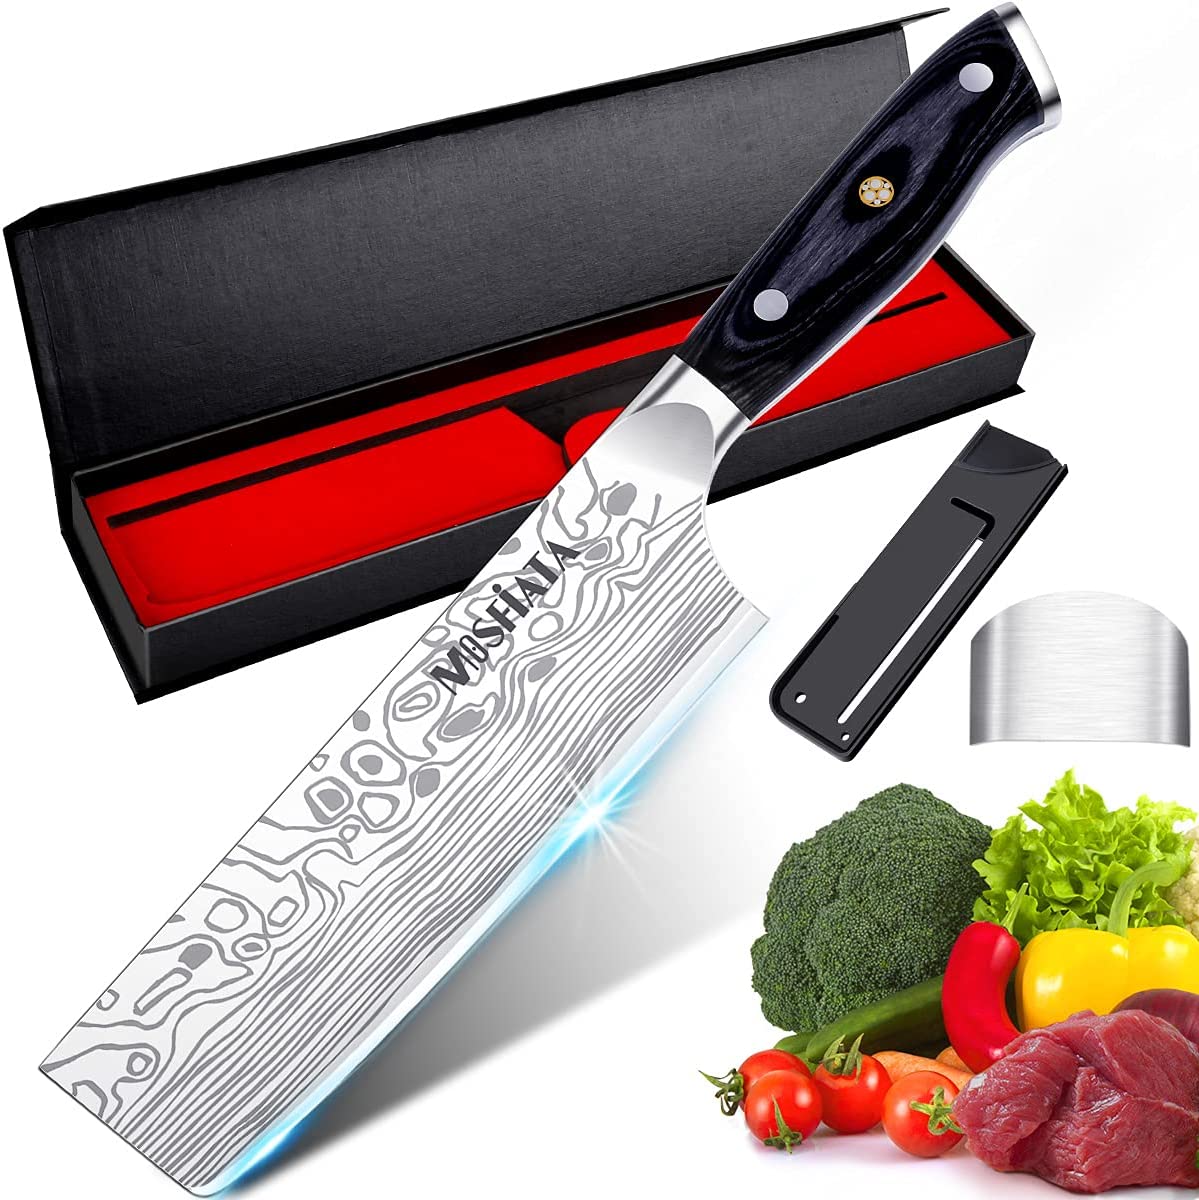 MOSFiATA 7” Nakiri Chef’s Knife with Finger Guard and Blade Guard in Gift Box, German High Carbon Stainless Steel EN1.4116 Nakiri Vegetable Knife,…